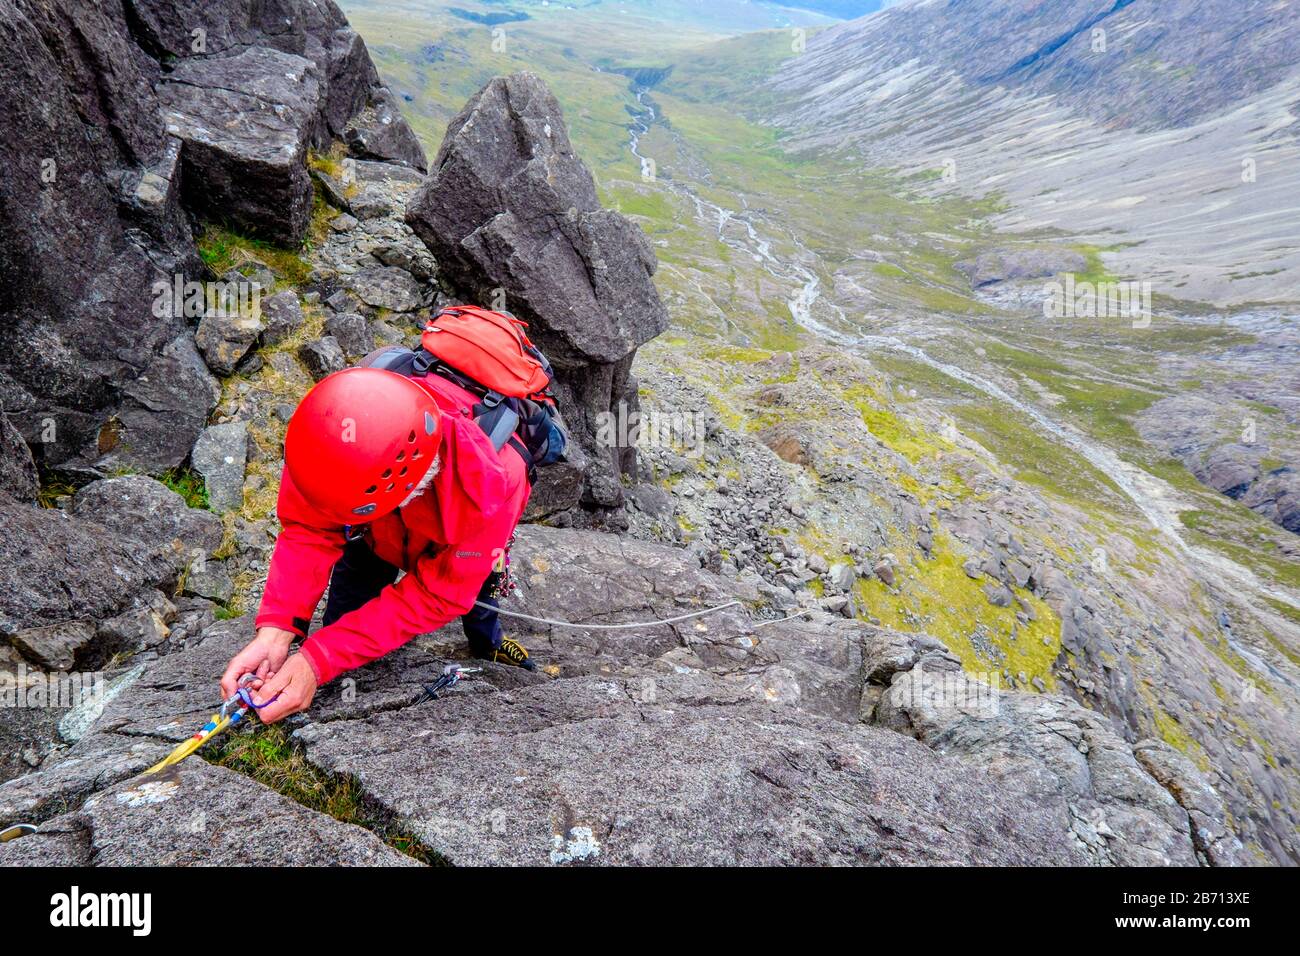 A rock climber setting up a belay in the Cuillin mountains of Skye, Scotland Stock Photo